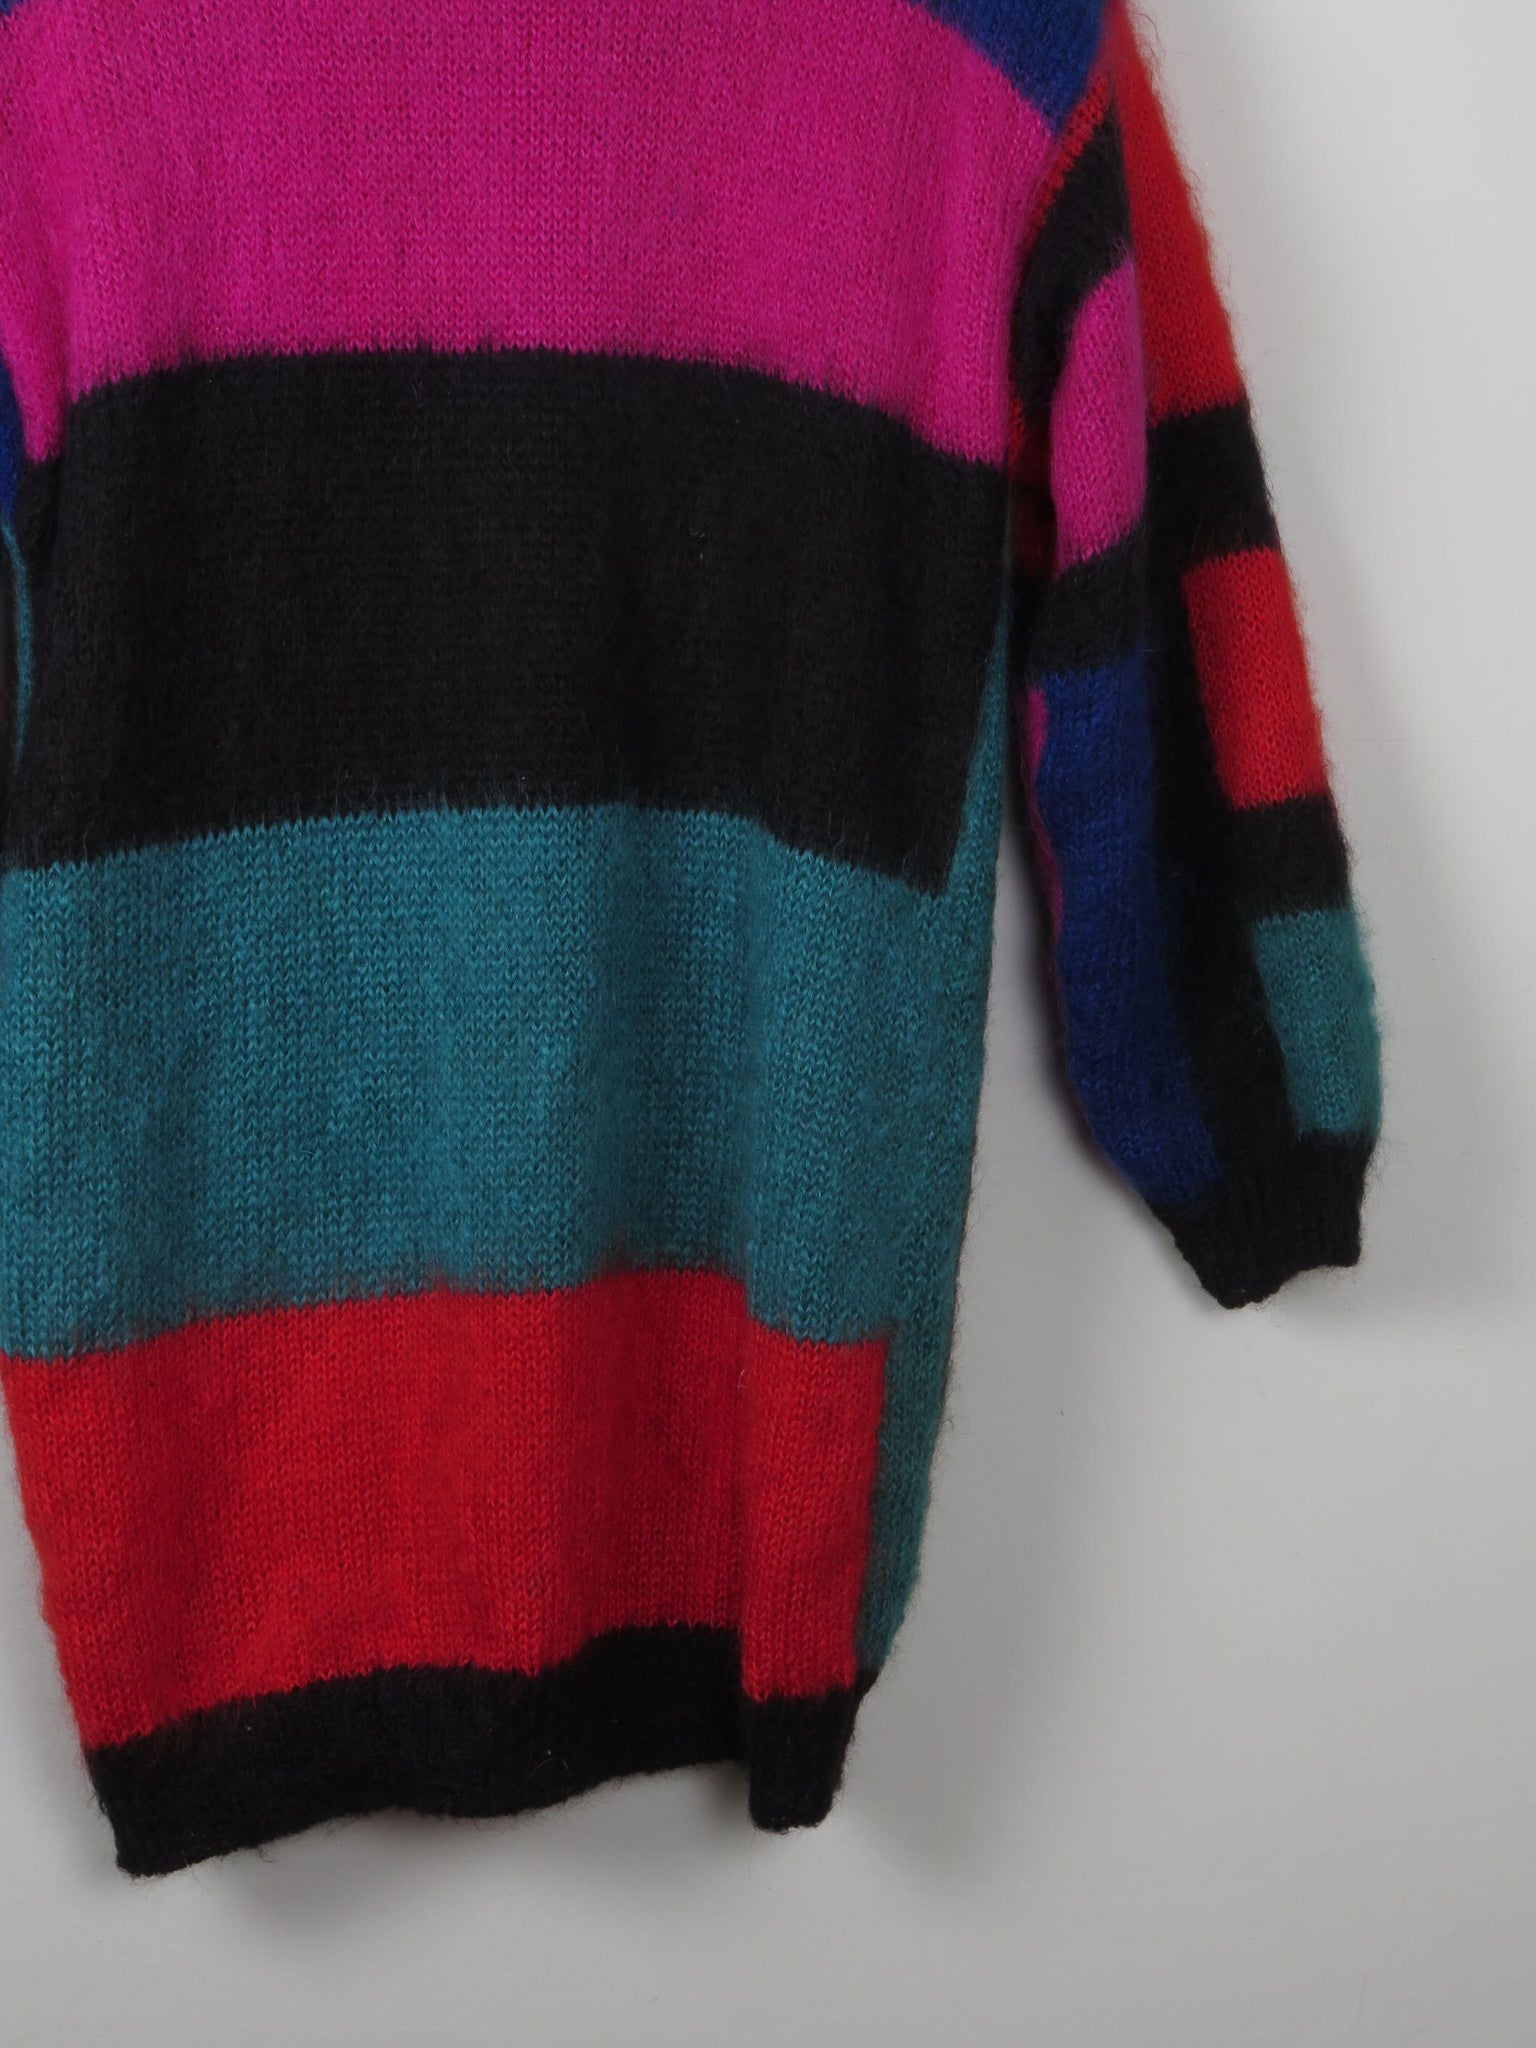 Women's Vintage Mohair Long Colourful Cardigan S/M - The Harlequin